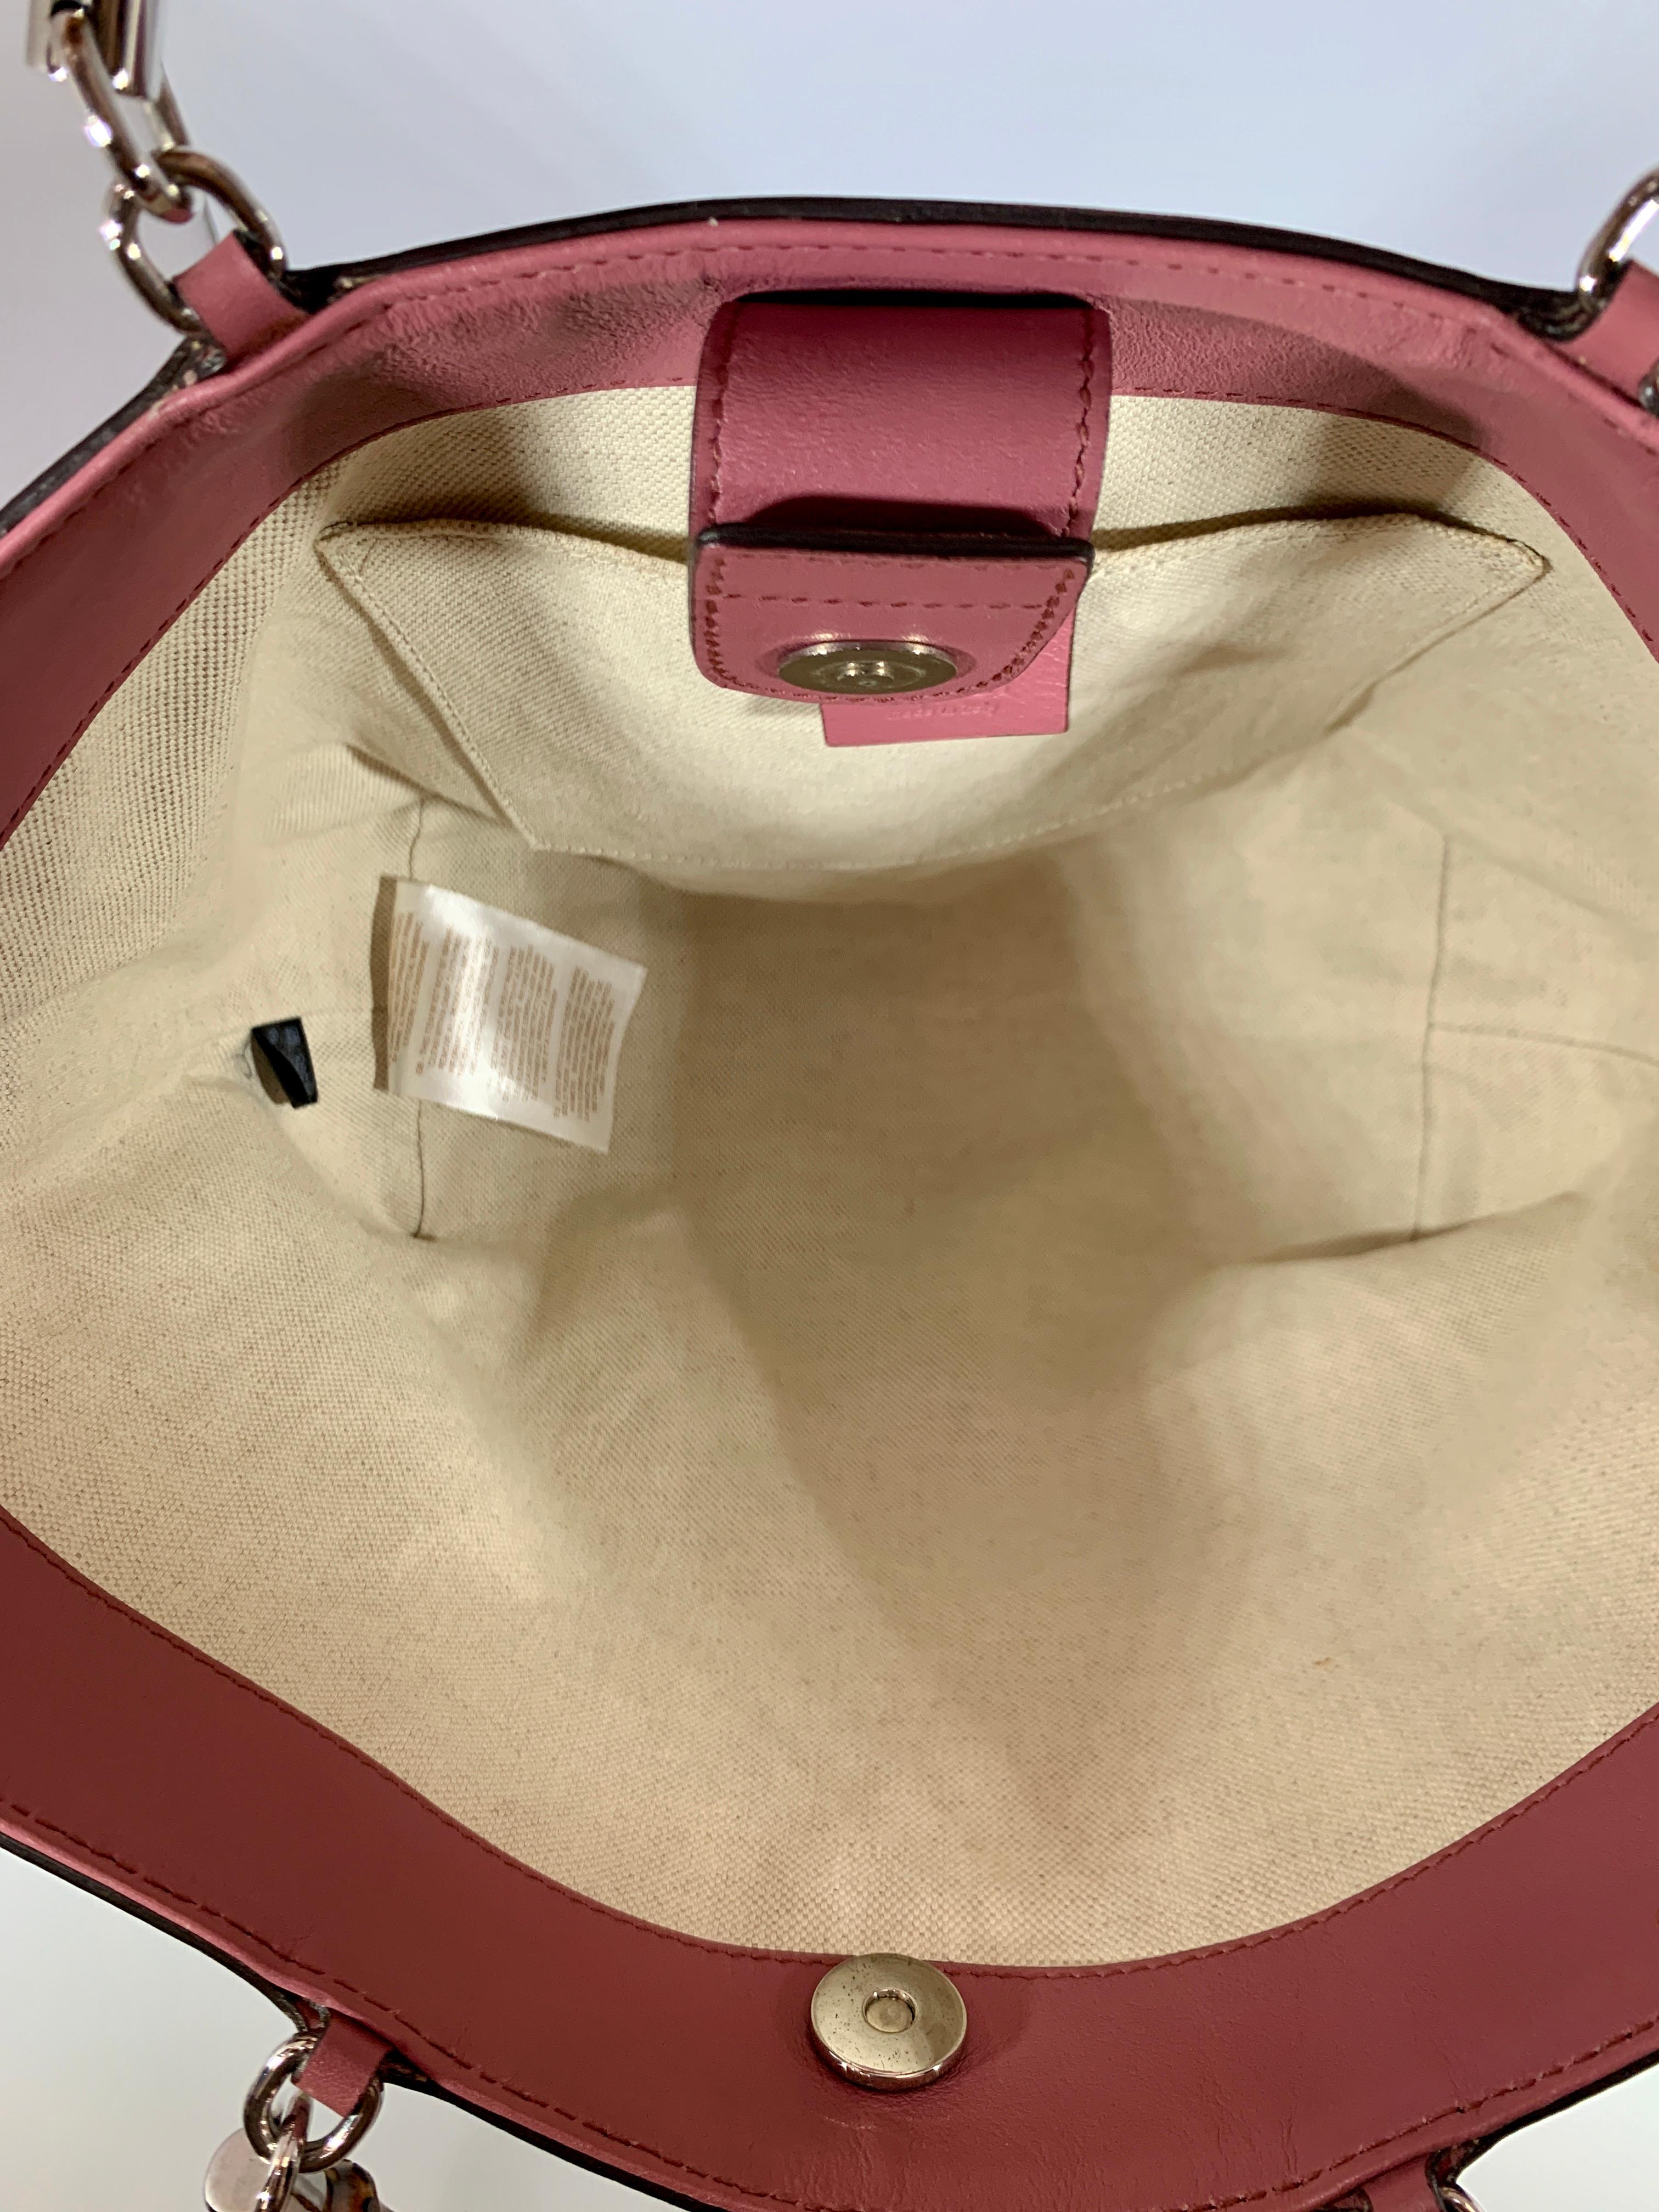 Gucci Brown Medium Pink Canvas GG  Guccissima Bamboo Tote Handbag Purse Kids 
Authenticity Guaranteed 
Details
Brand: Gucci Lids Line
Condition: Excellent like new , hardly used , no sign of use
Color Beige And Brown and Pink
Magnetic button flap